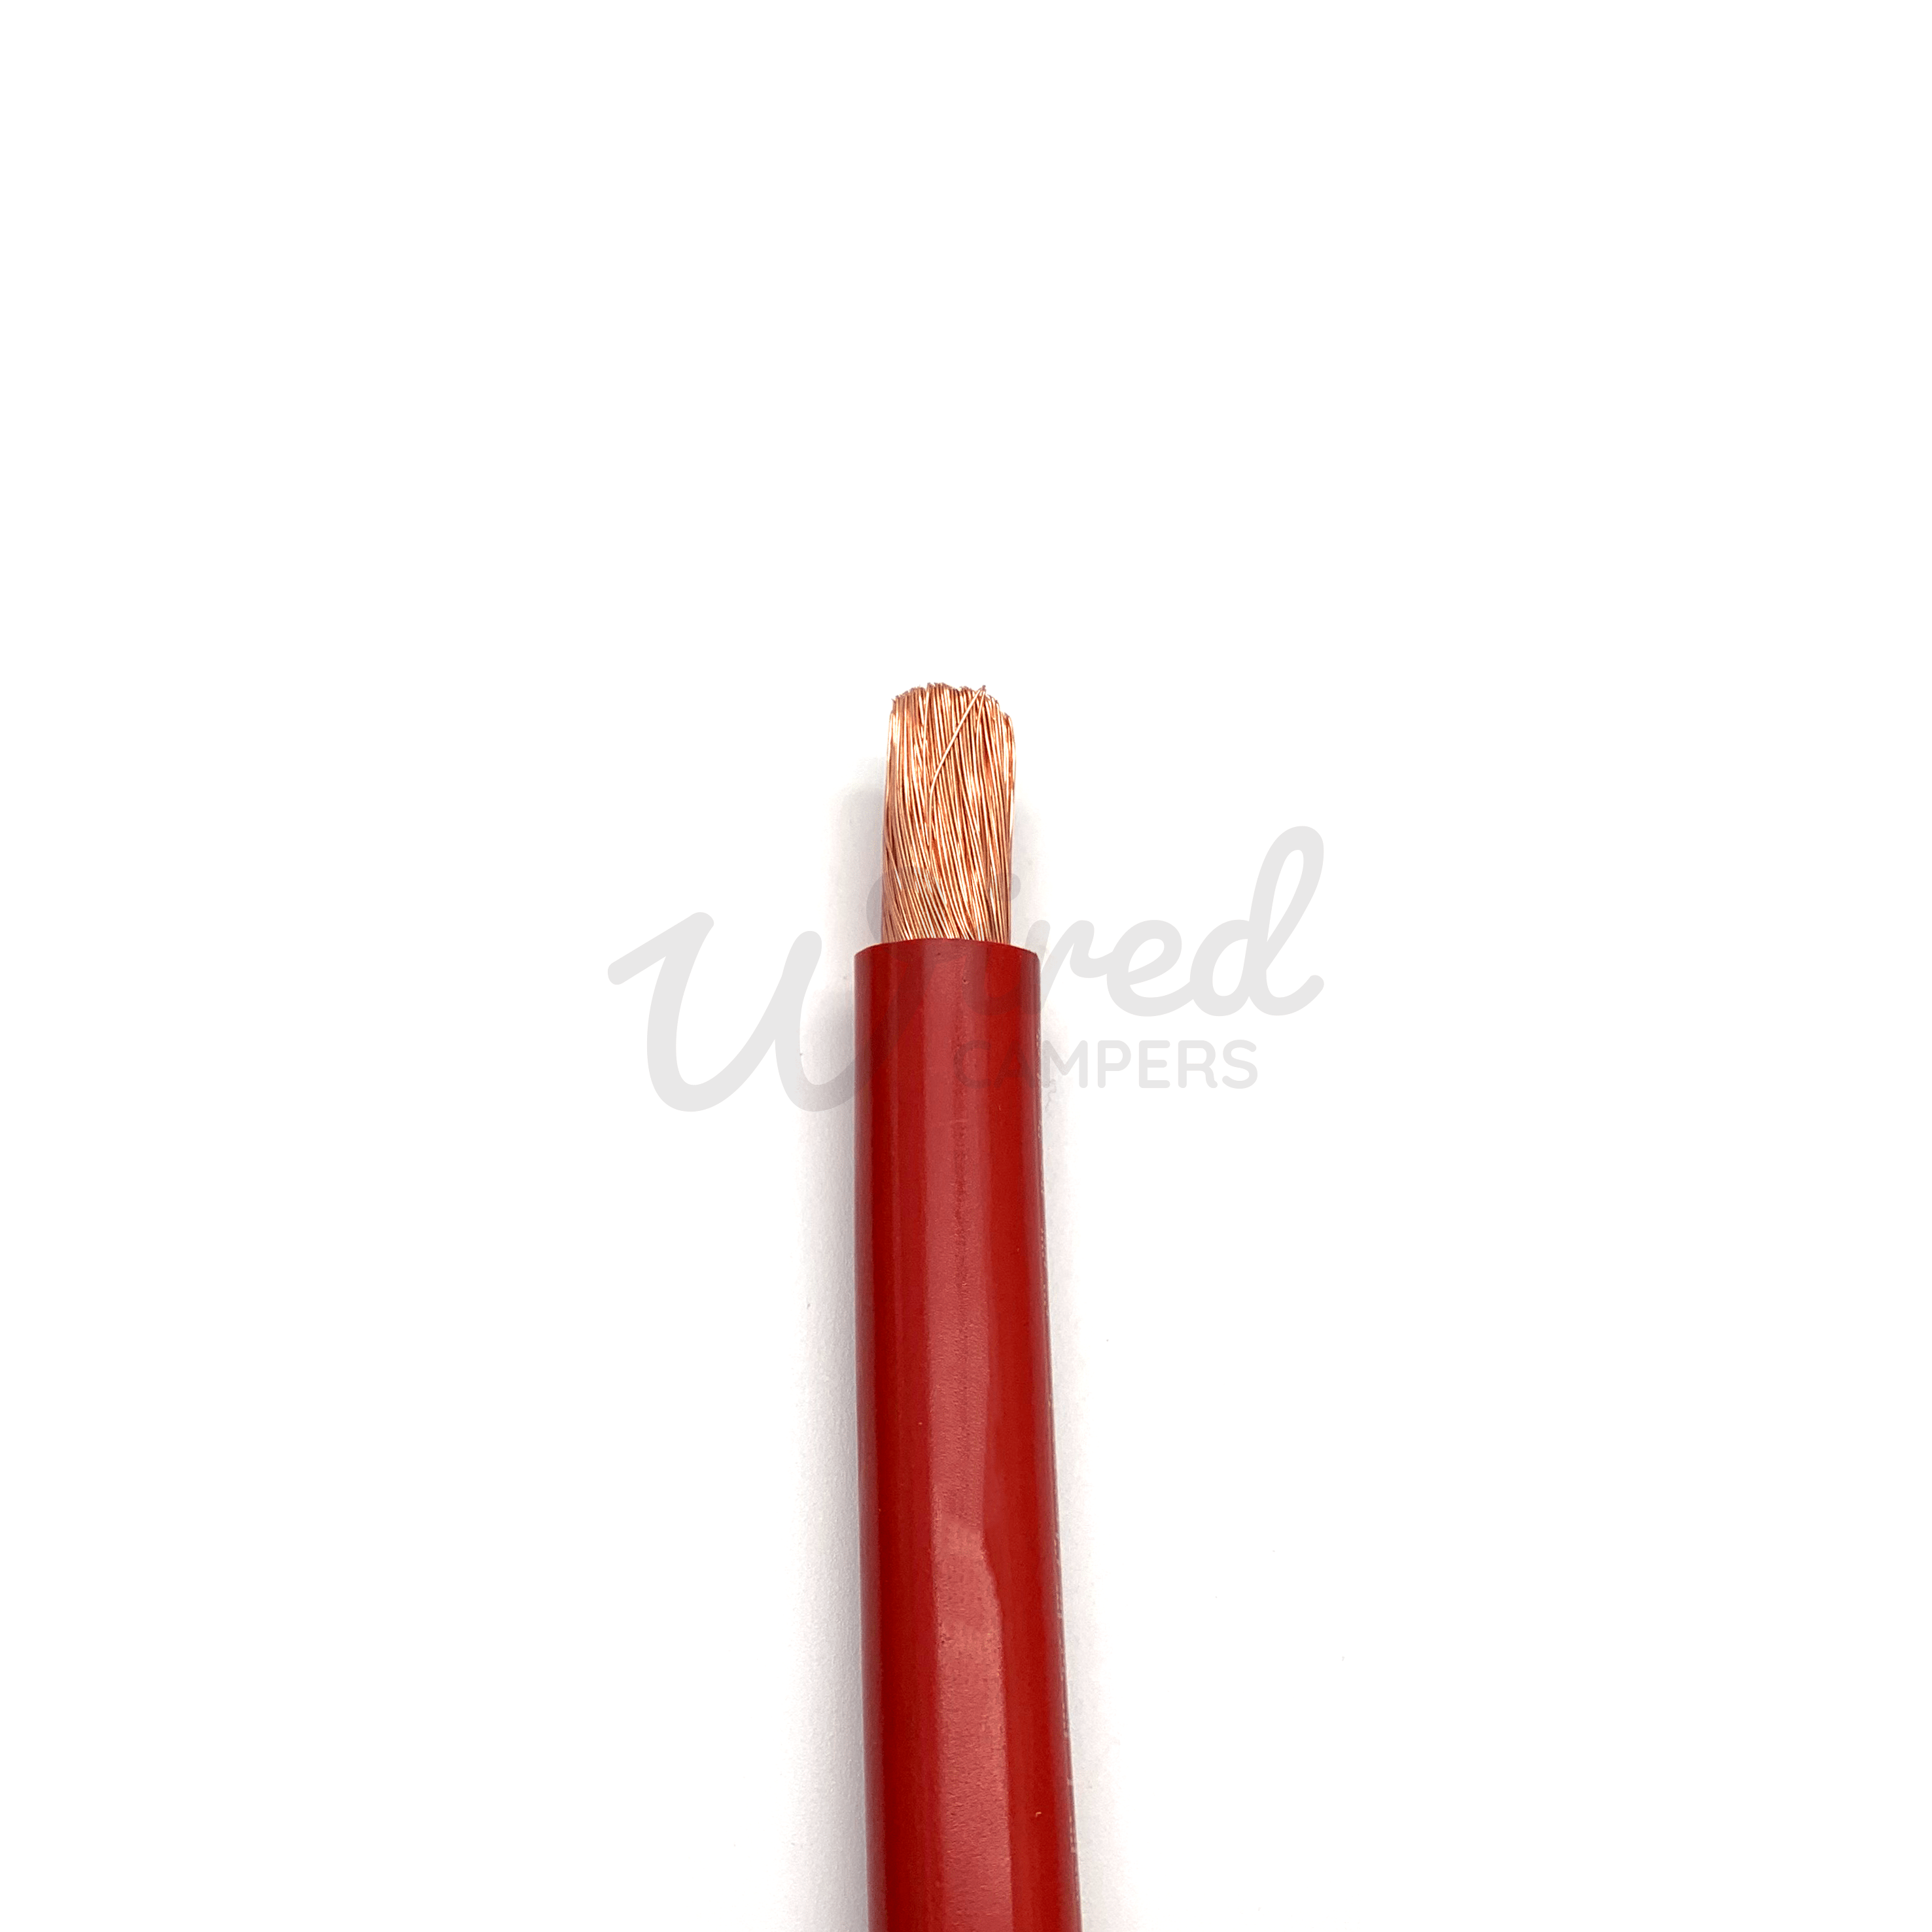 Wired Campers Limited 10M - 50mm² 345A Hi-Flex Battery/Welding/Inverter Flexible Cable - Red Positive